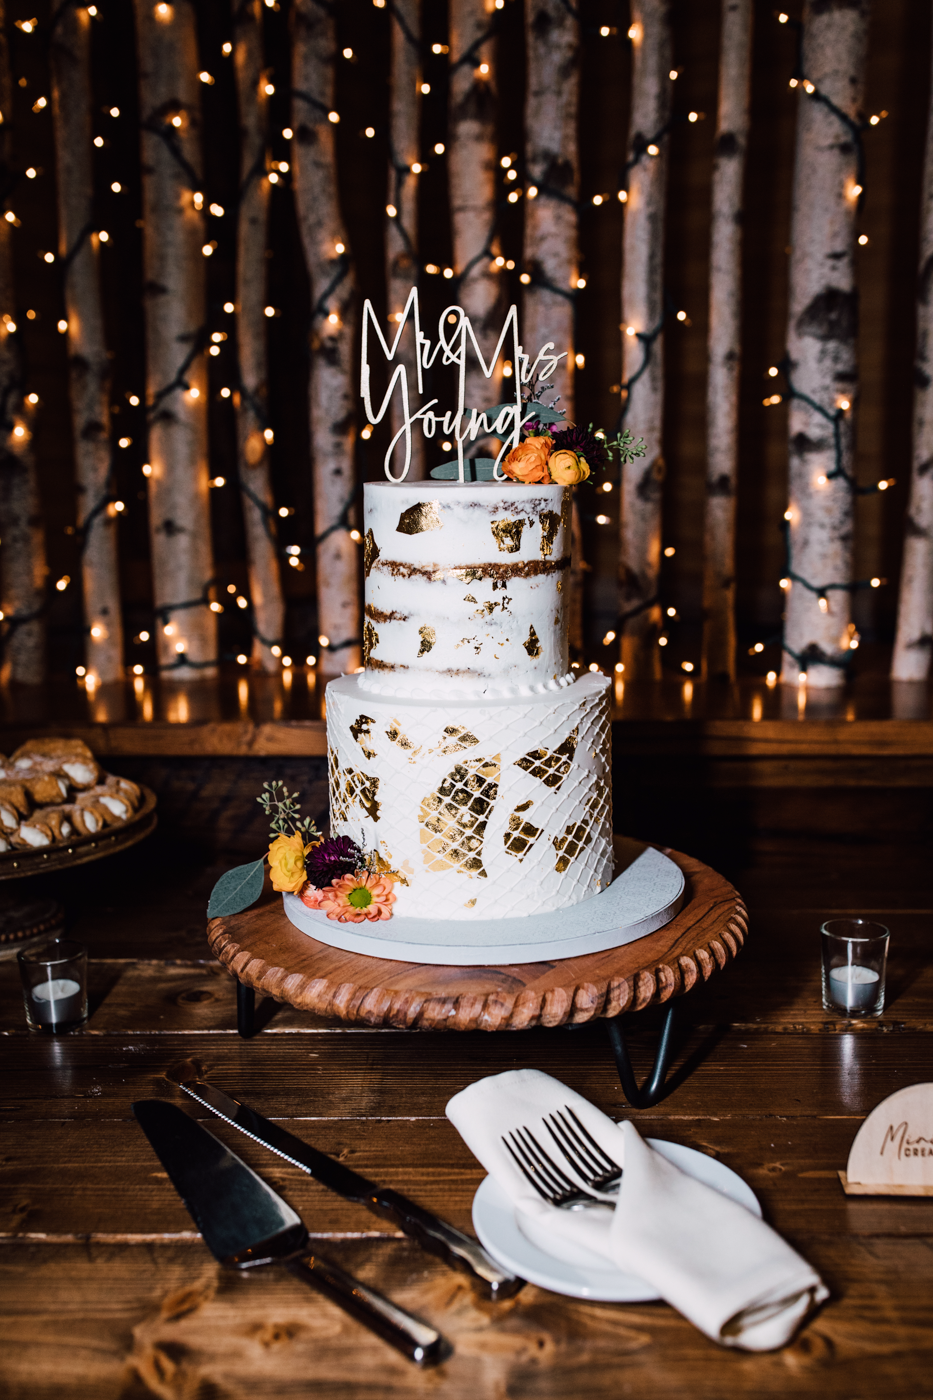  Rustic fall wedding cake on a wooden table with string lights behind it at a Tailwater Lodge wedding reception 